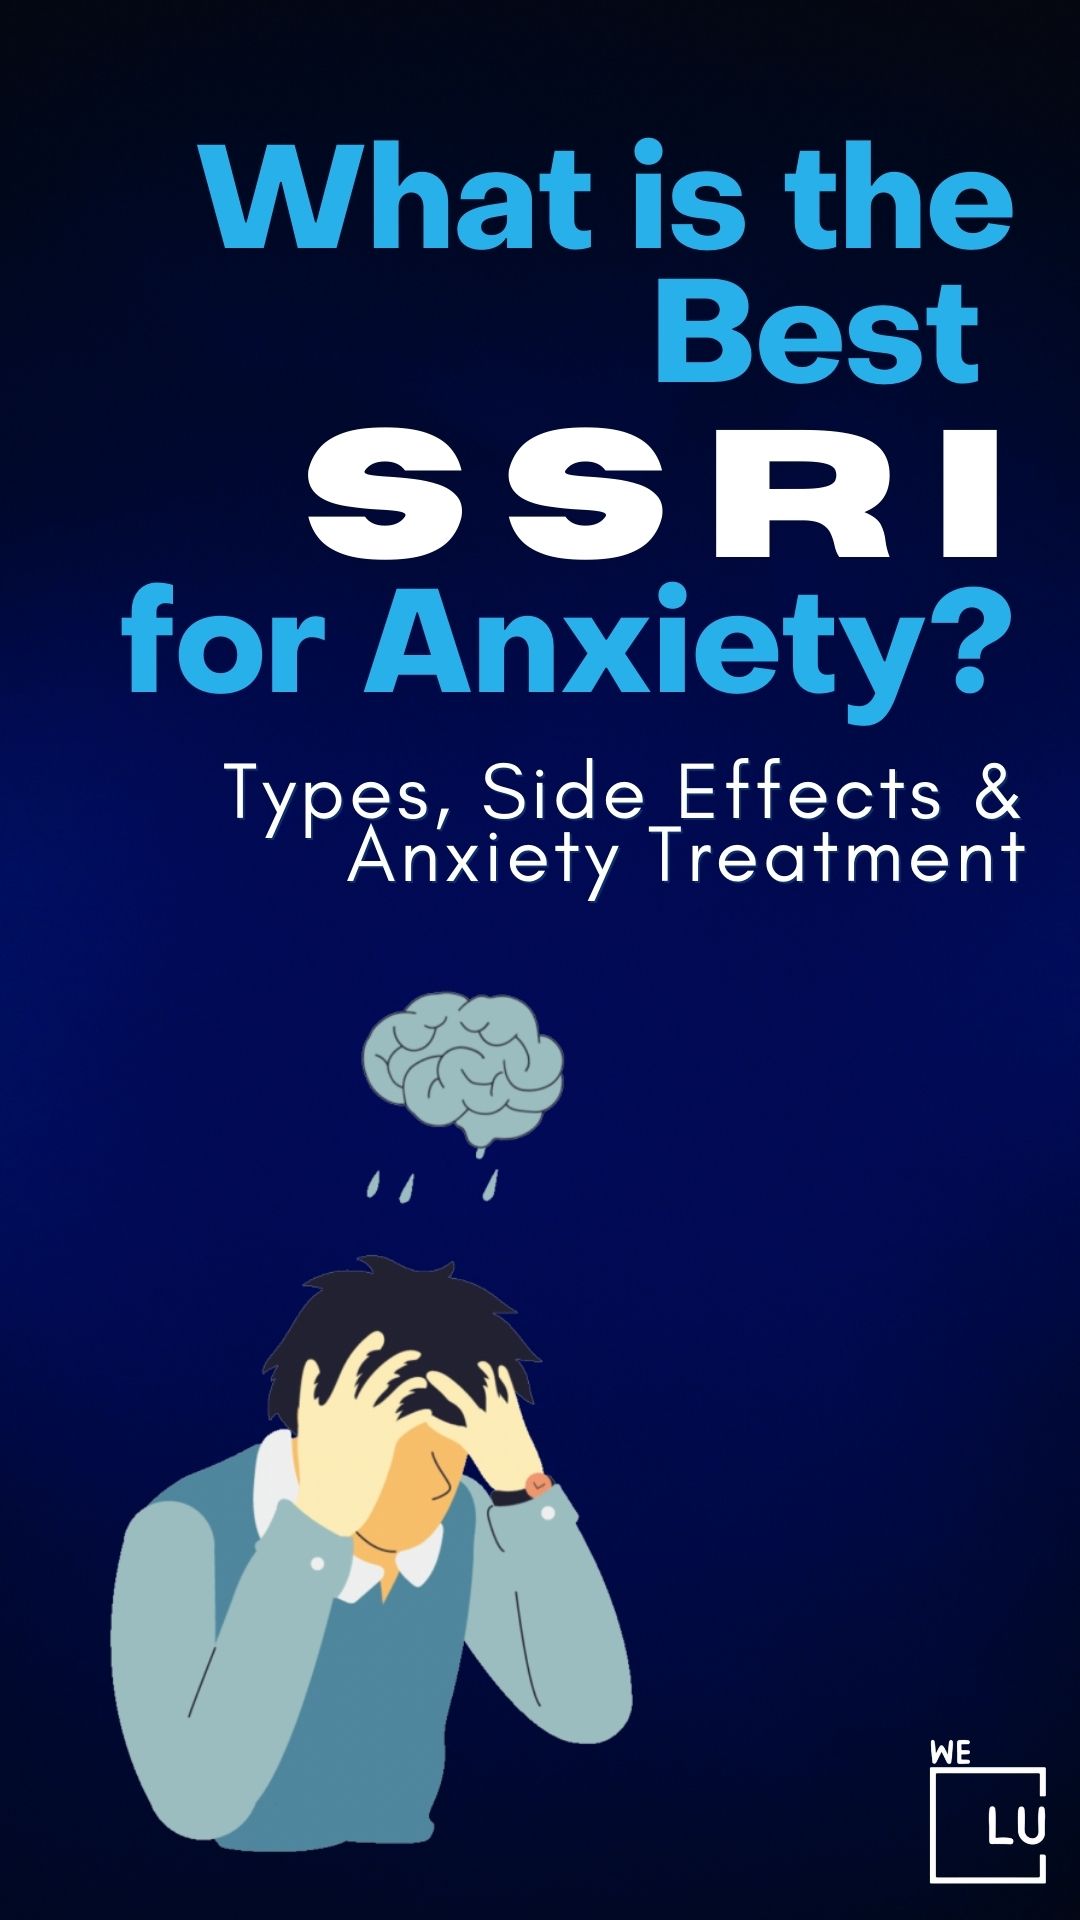 What is the Best SSRI for Anxiety? Types, Side Effects & Anxiety Treatment